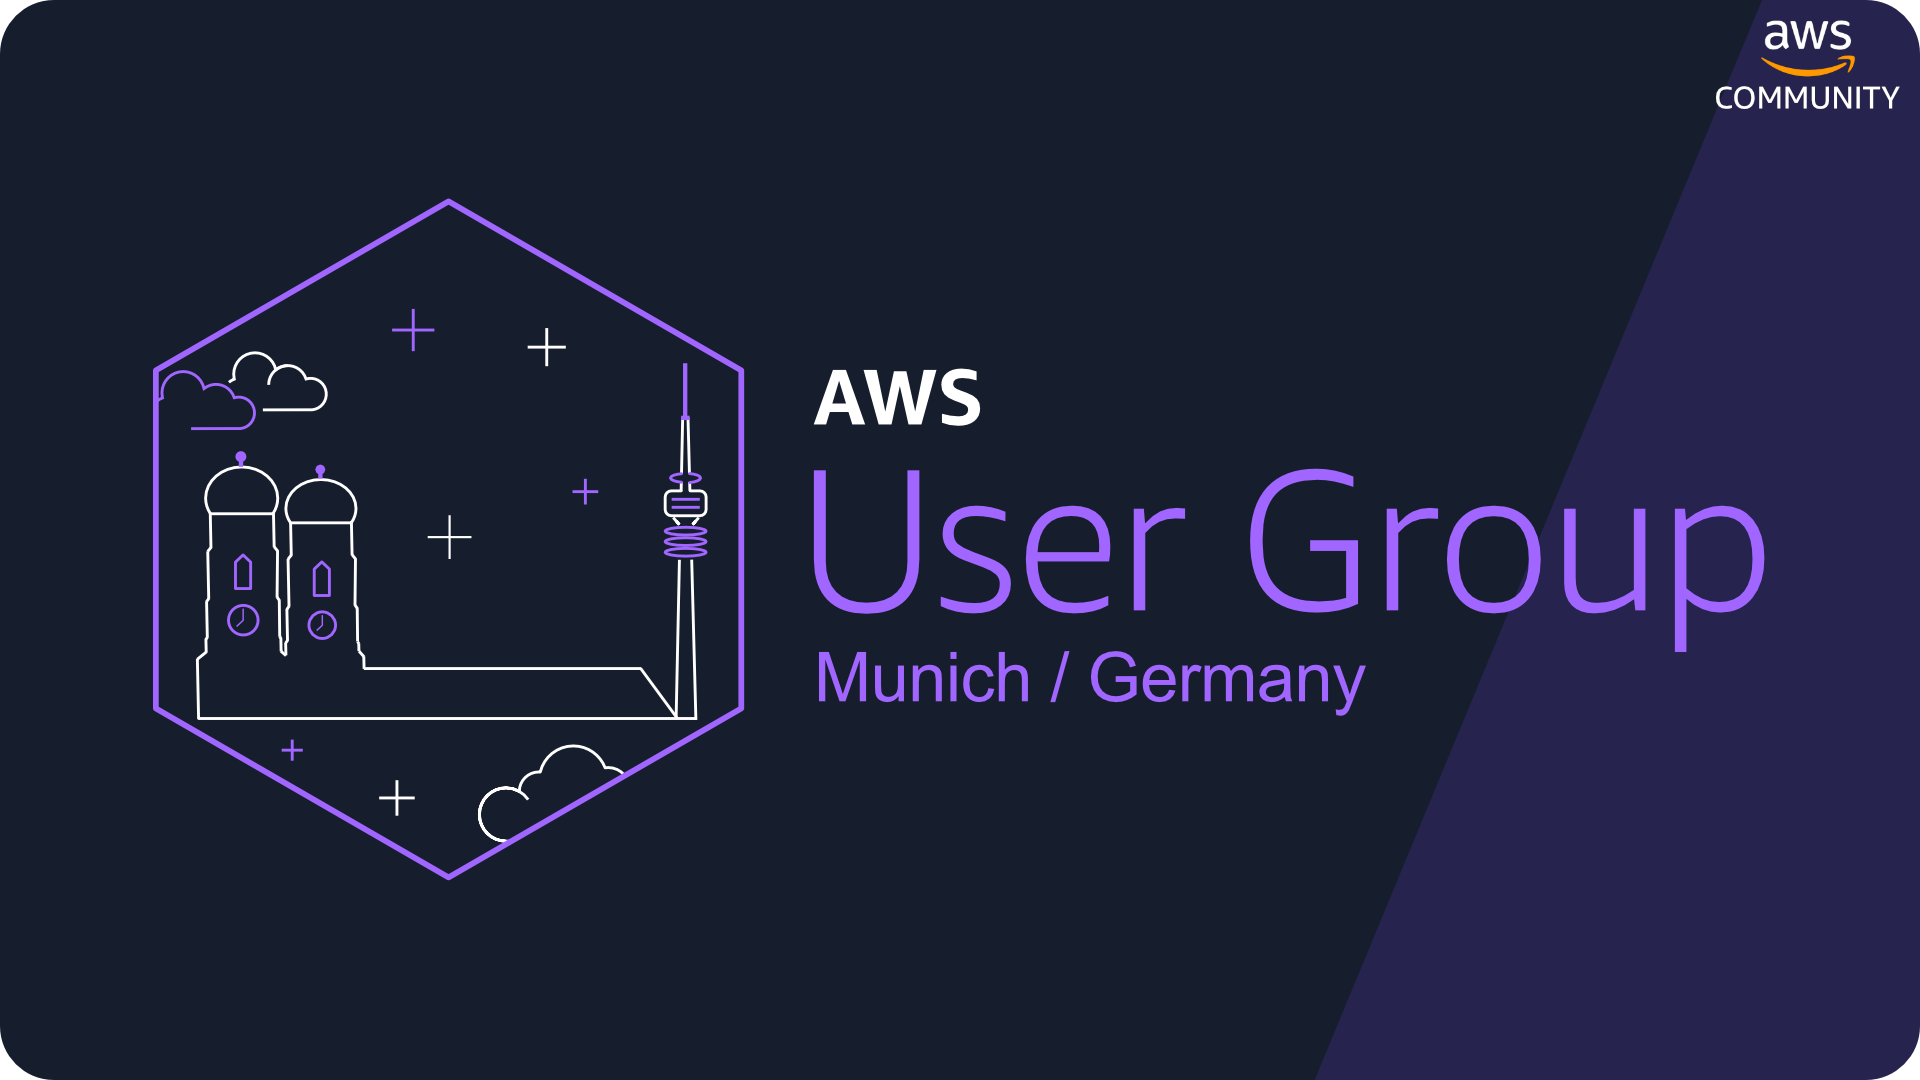 We're hosting the next AWS User Group meetup in Munich